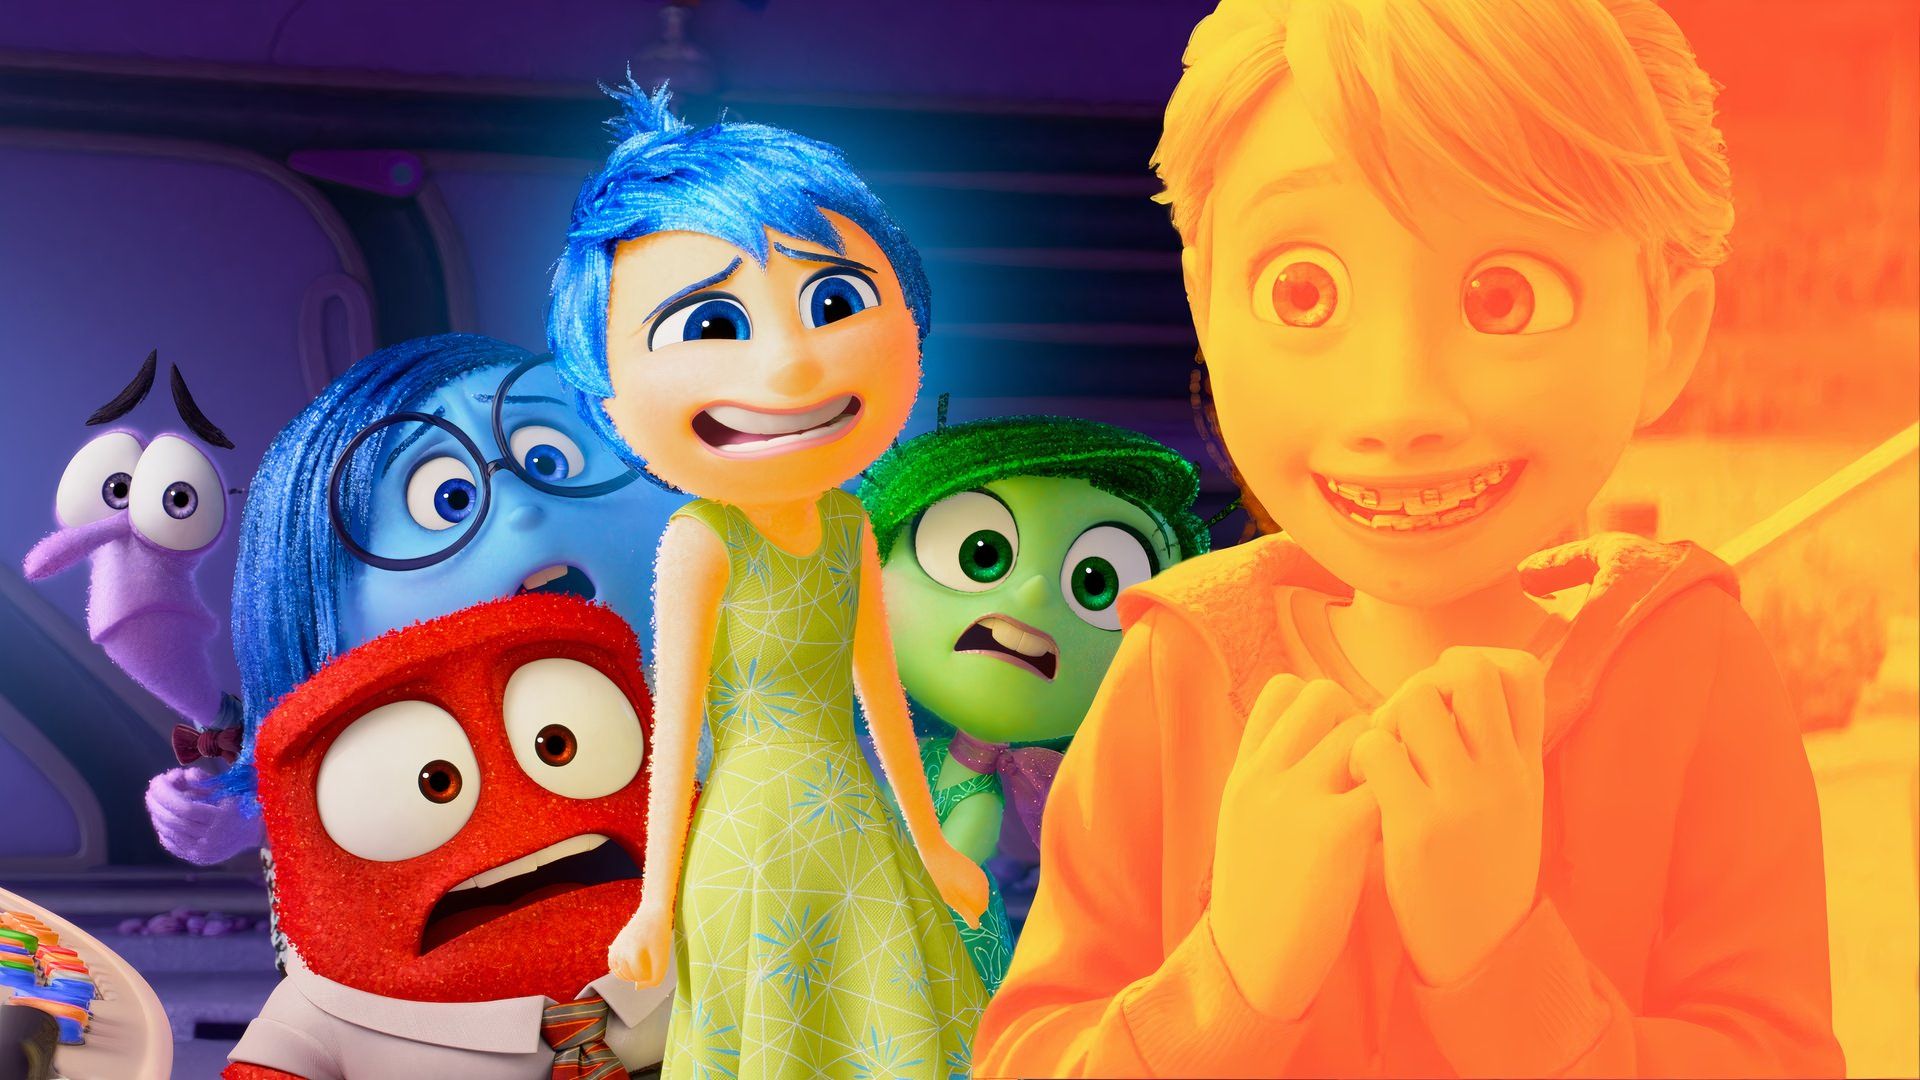 The cast of emotions in Inside Out 2 with Sadness, Anger, Joy, Fear, and Disgust next to Riley